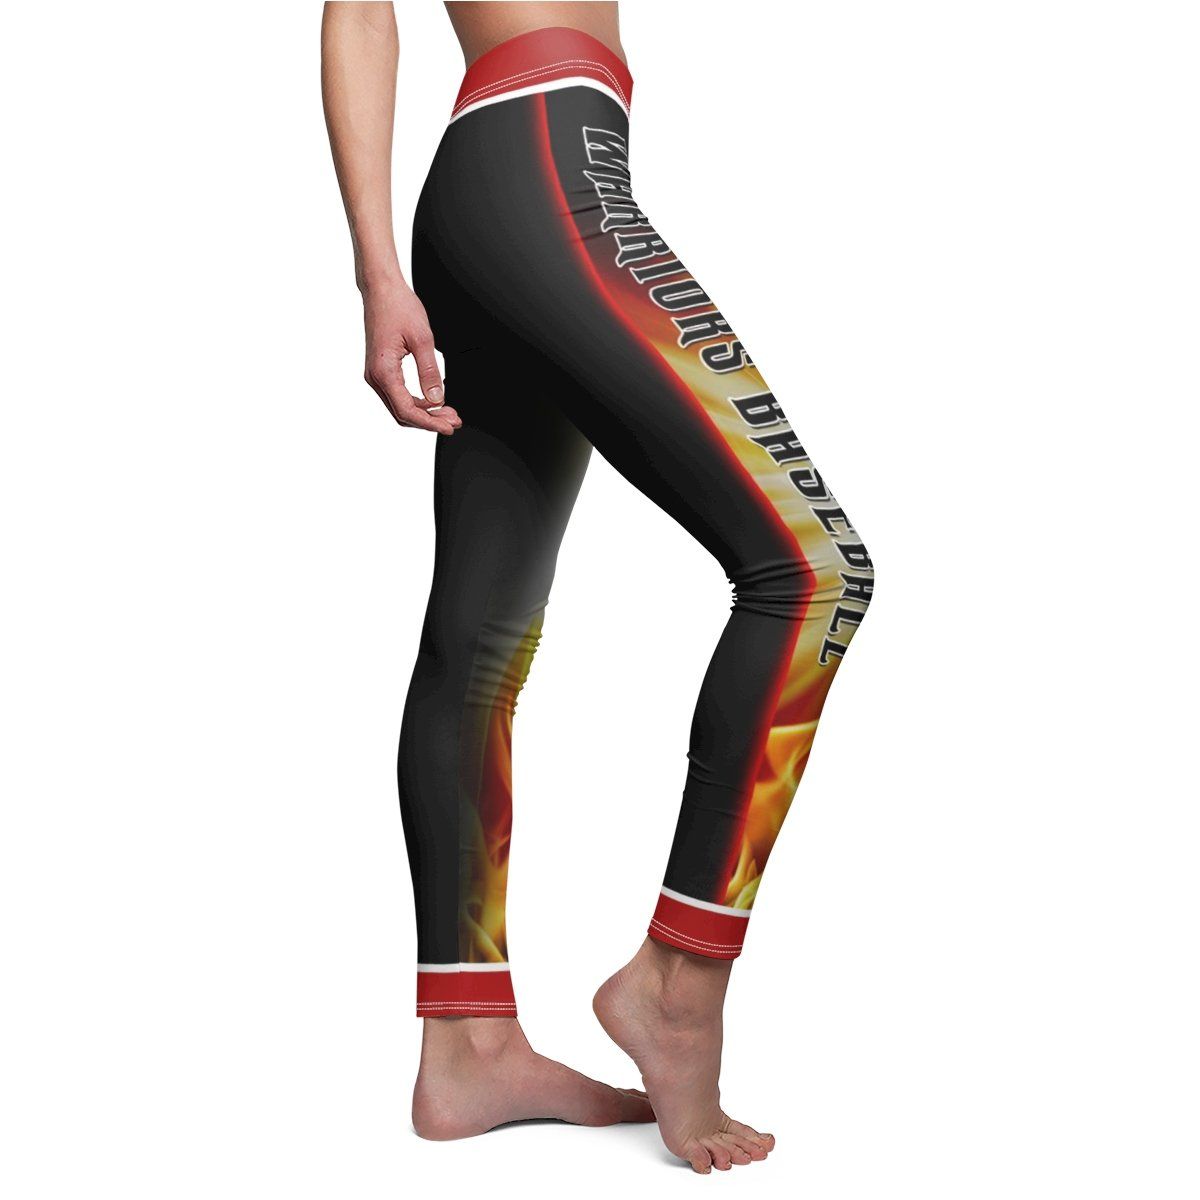 Burn - V.1 - Extreme Sportswear Cut & Sew Leggings Template-Photoshop Template - Photo Solutions